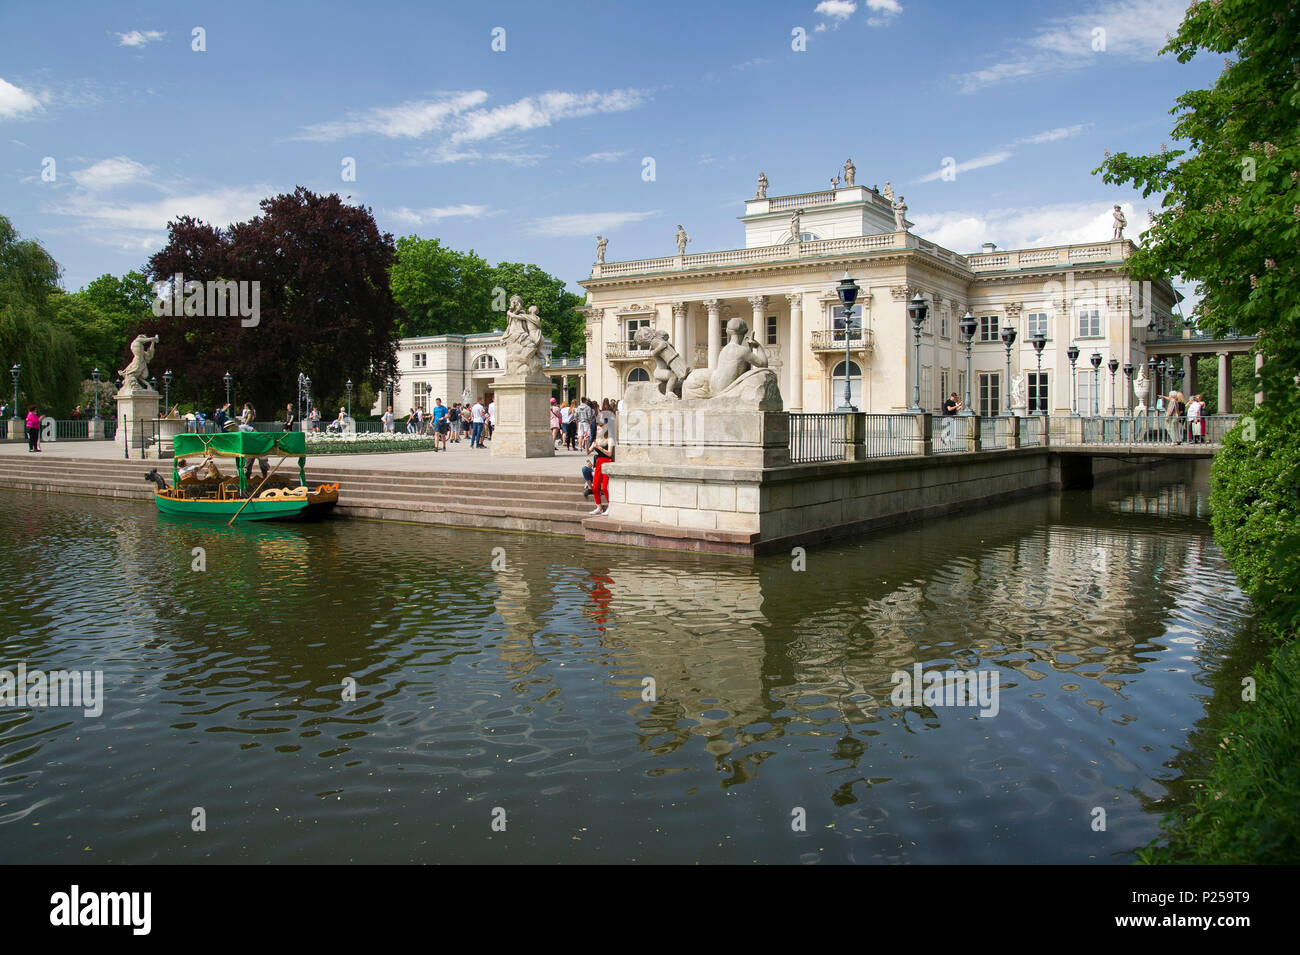 Classical Palac na Wodzie (Palace on the Water) designed by Tylman van Gameren in XVII century and remodeled by Domenico Merlini in XVIII century for  Stock Photo